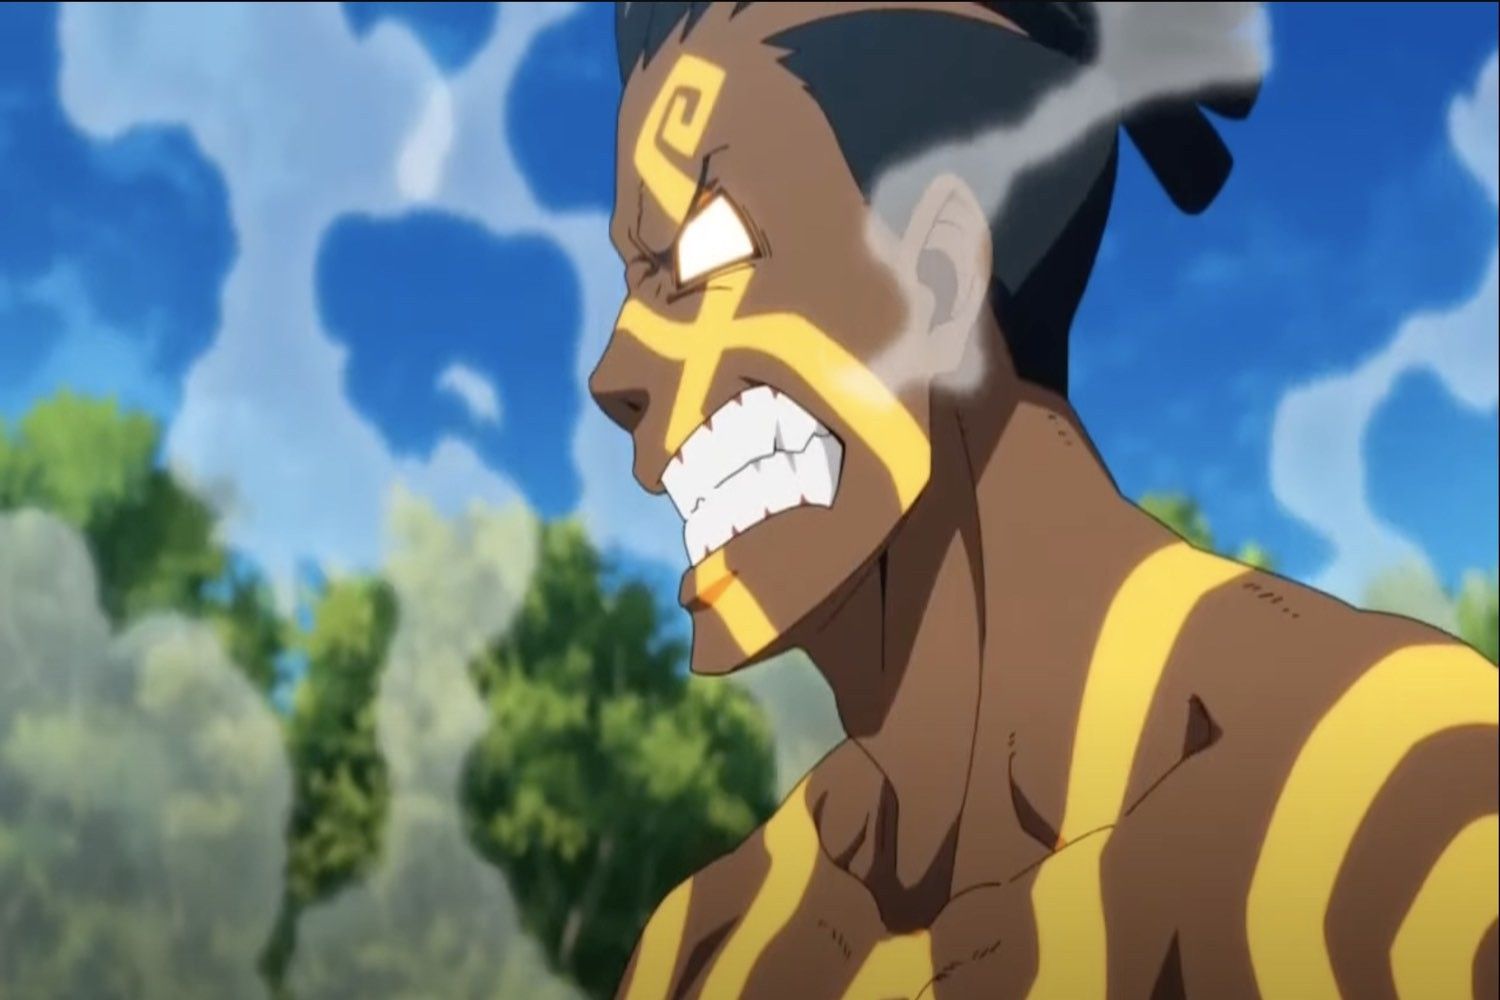 What are the best black anime characters? - Quora